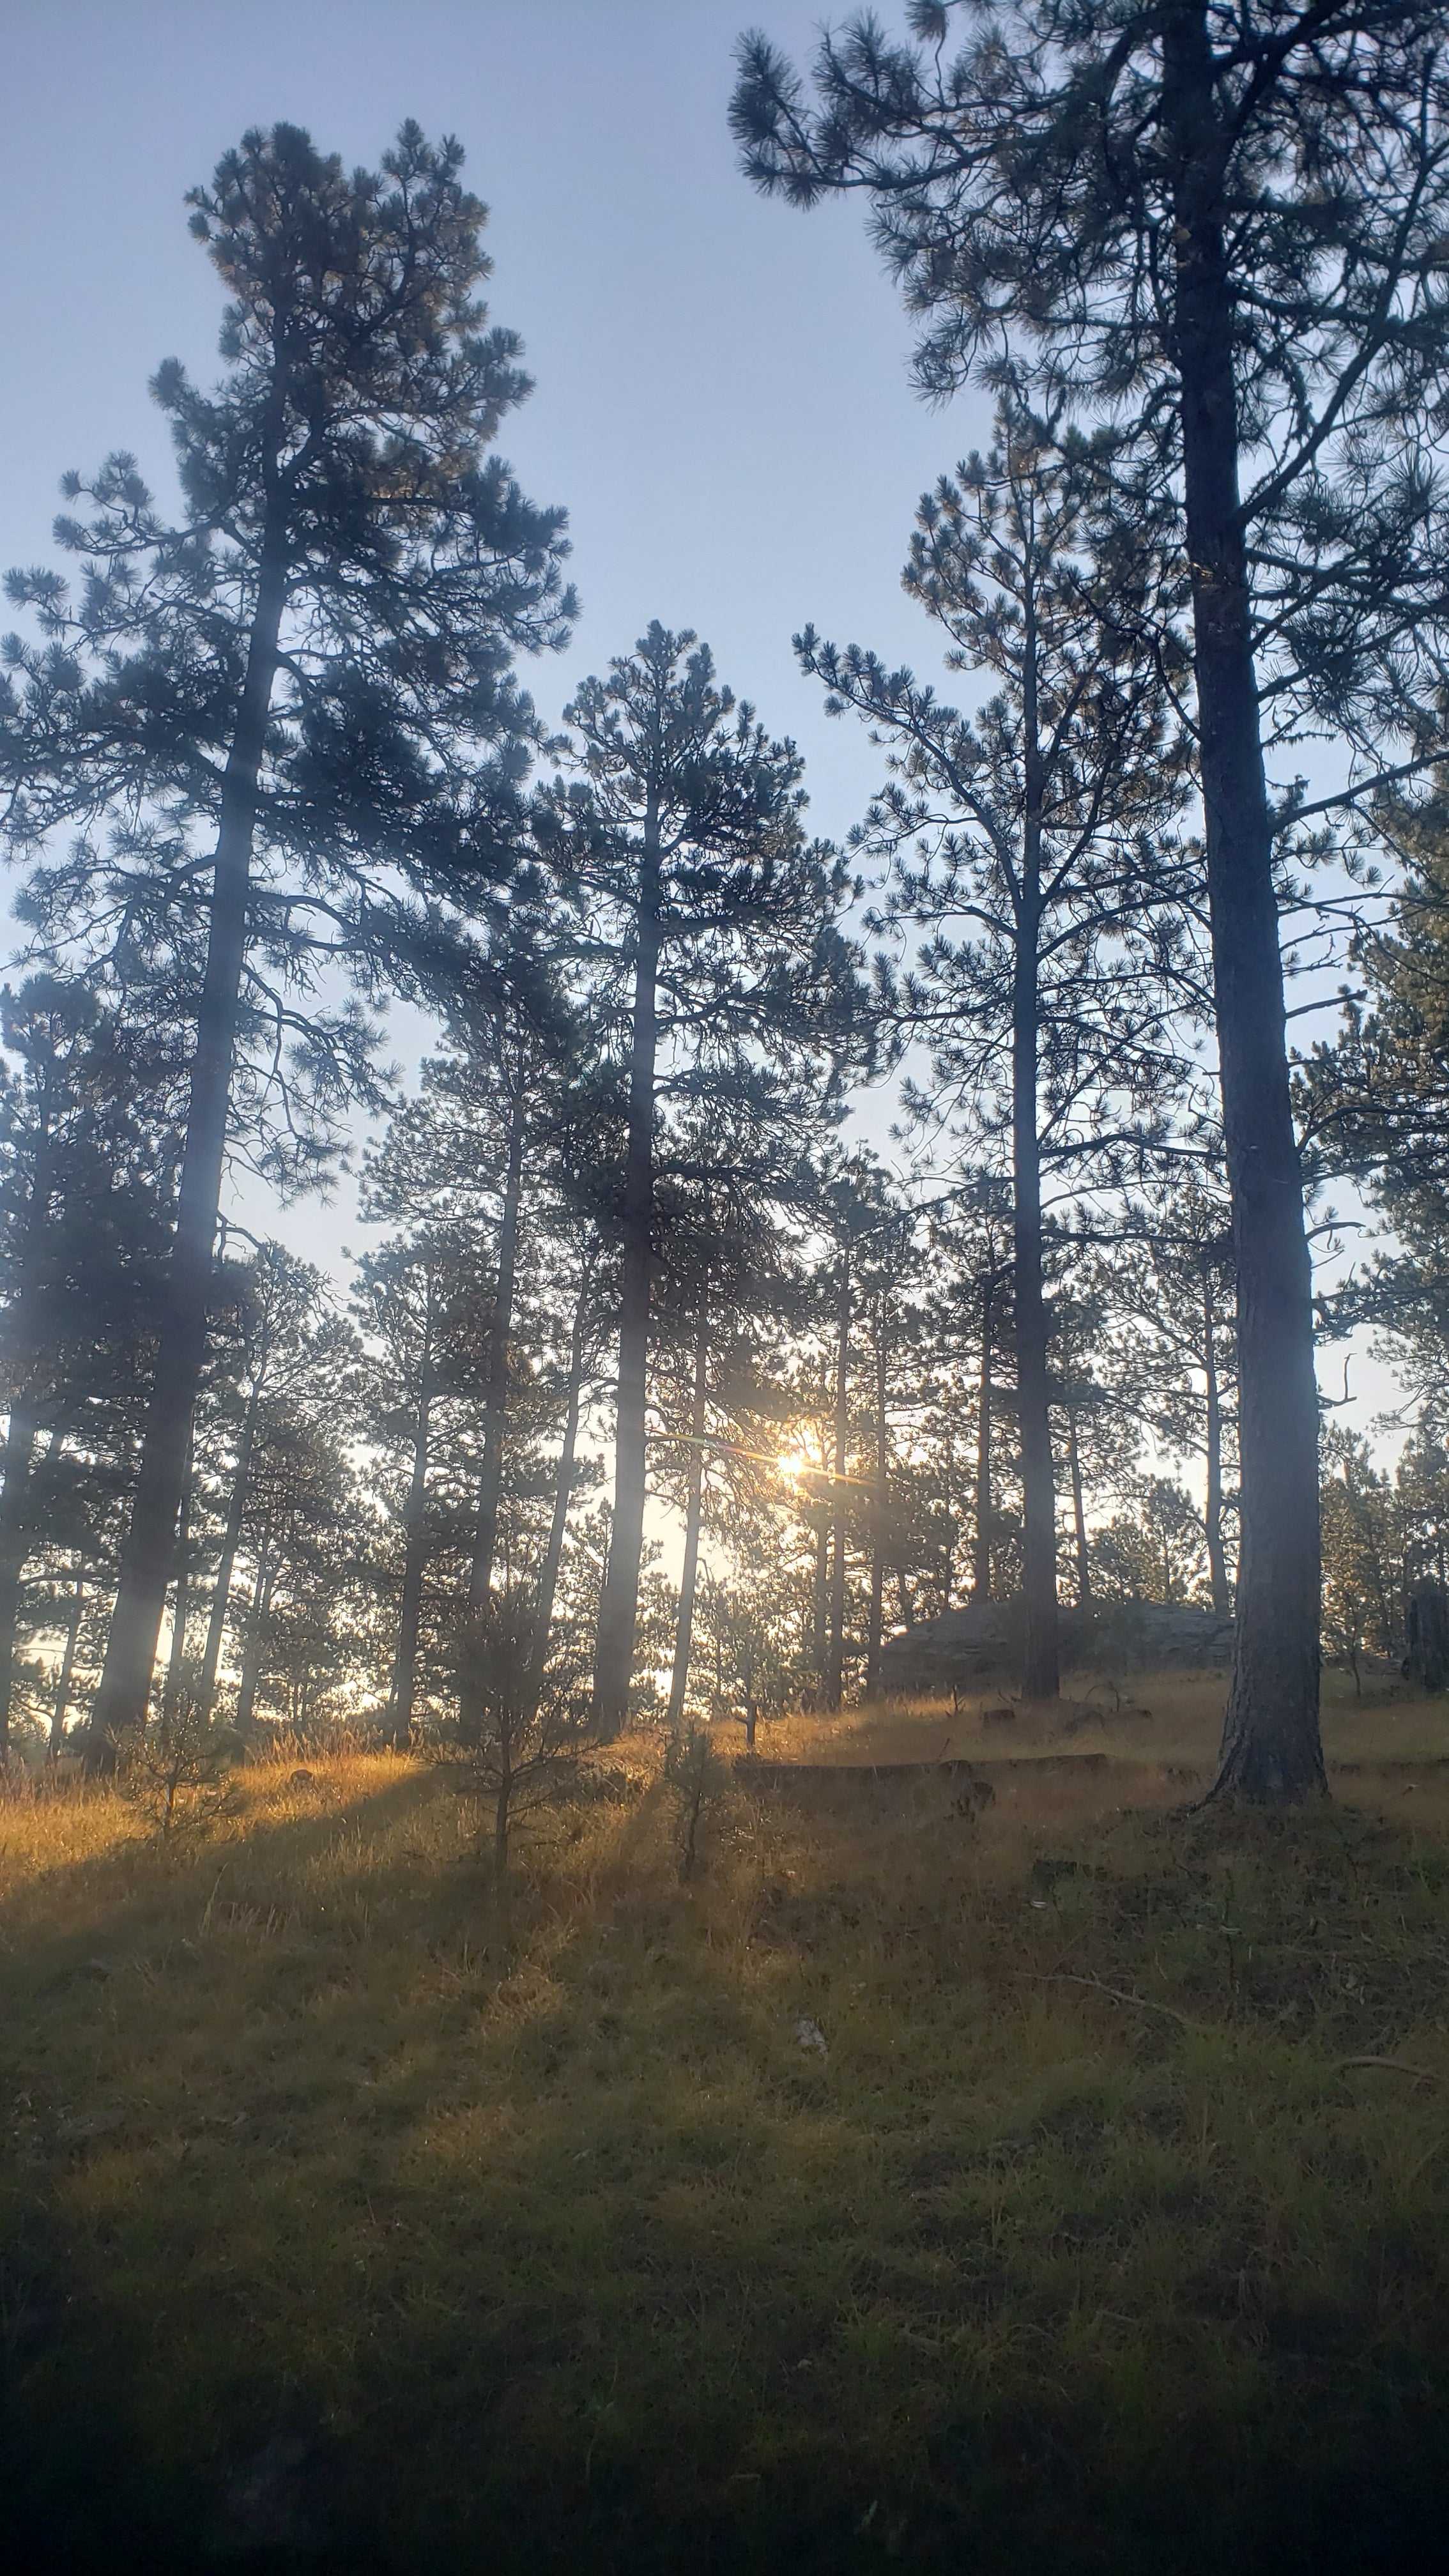 Camper submitted image from RD 356 Dispersed Site Black Hills National Forest - 2